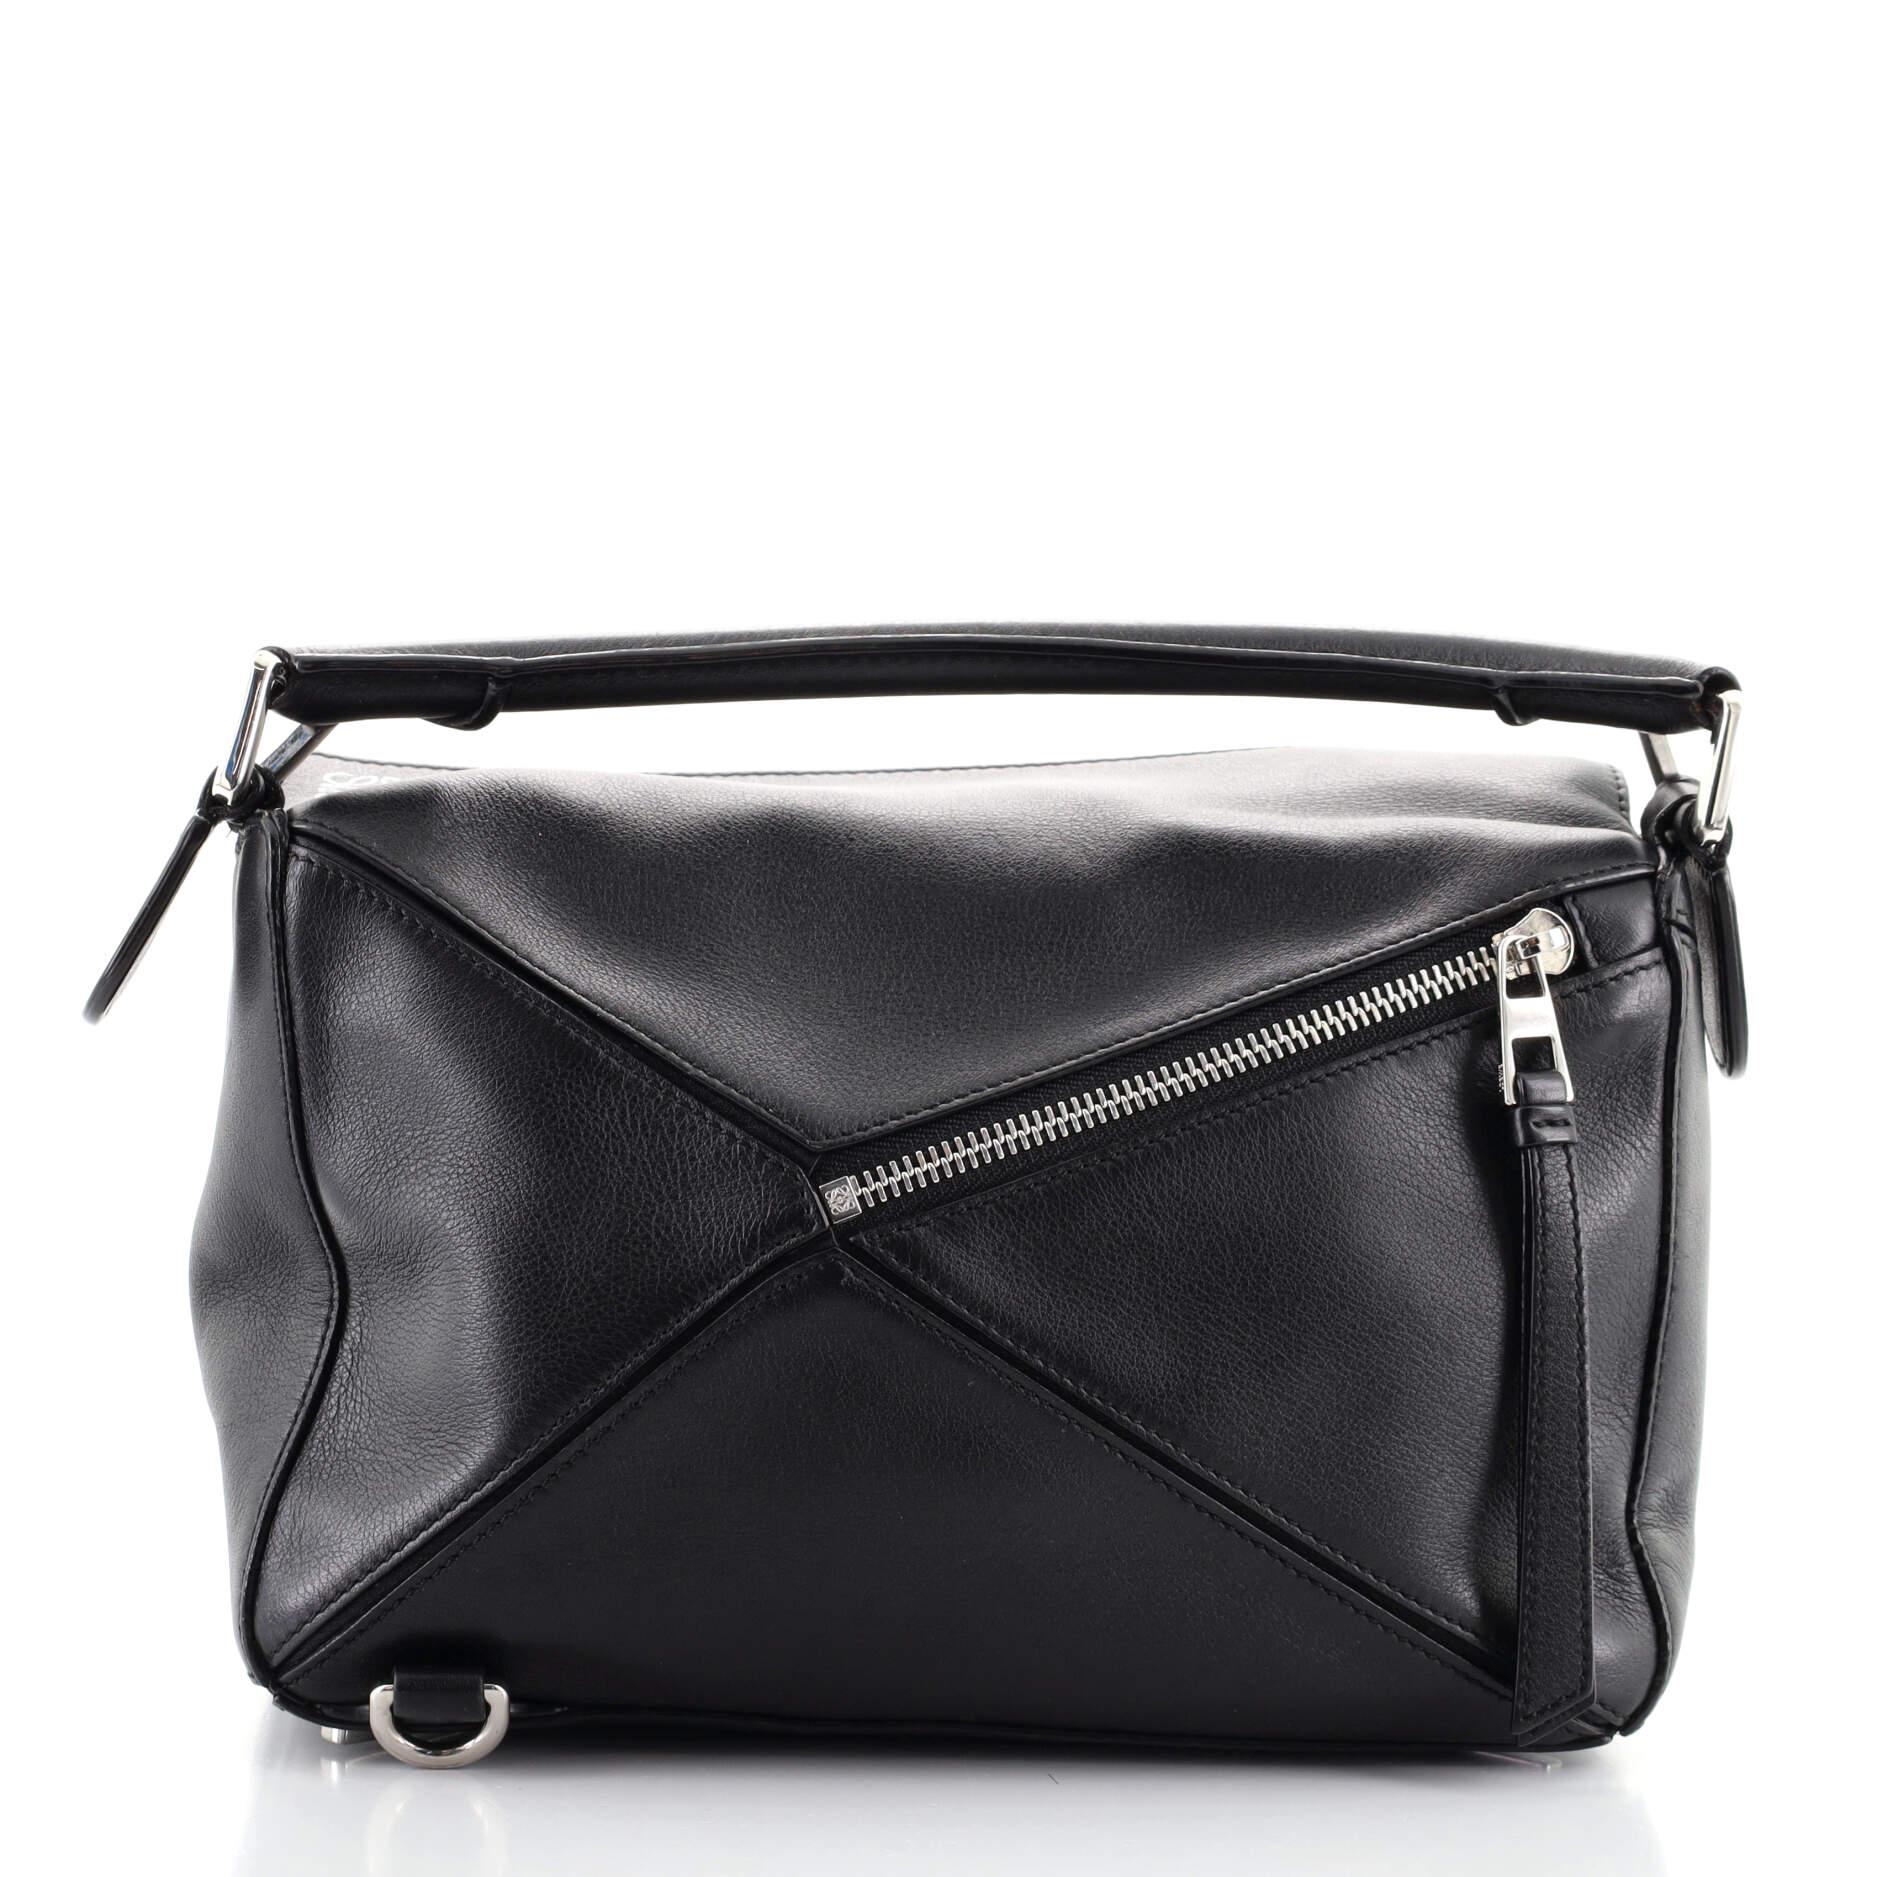 Black Loewe Puzzle Bag Leather Small